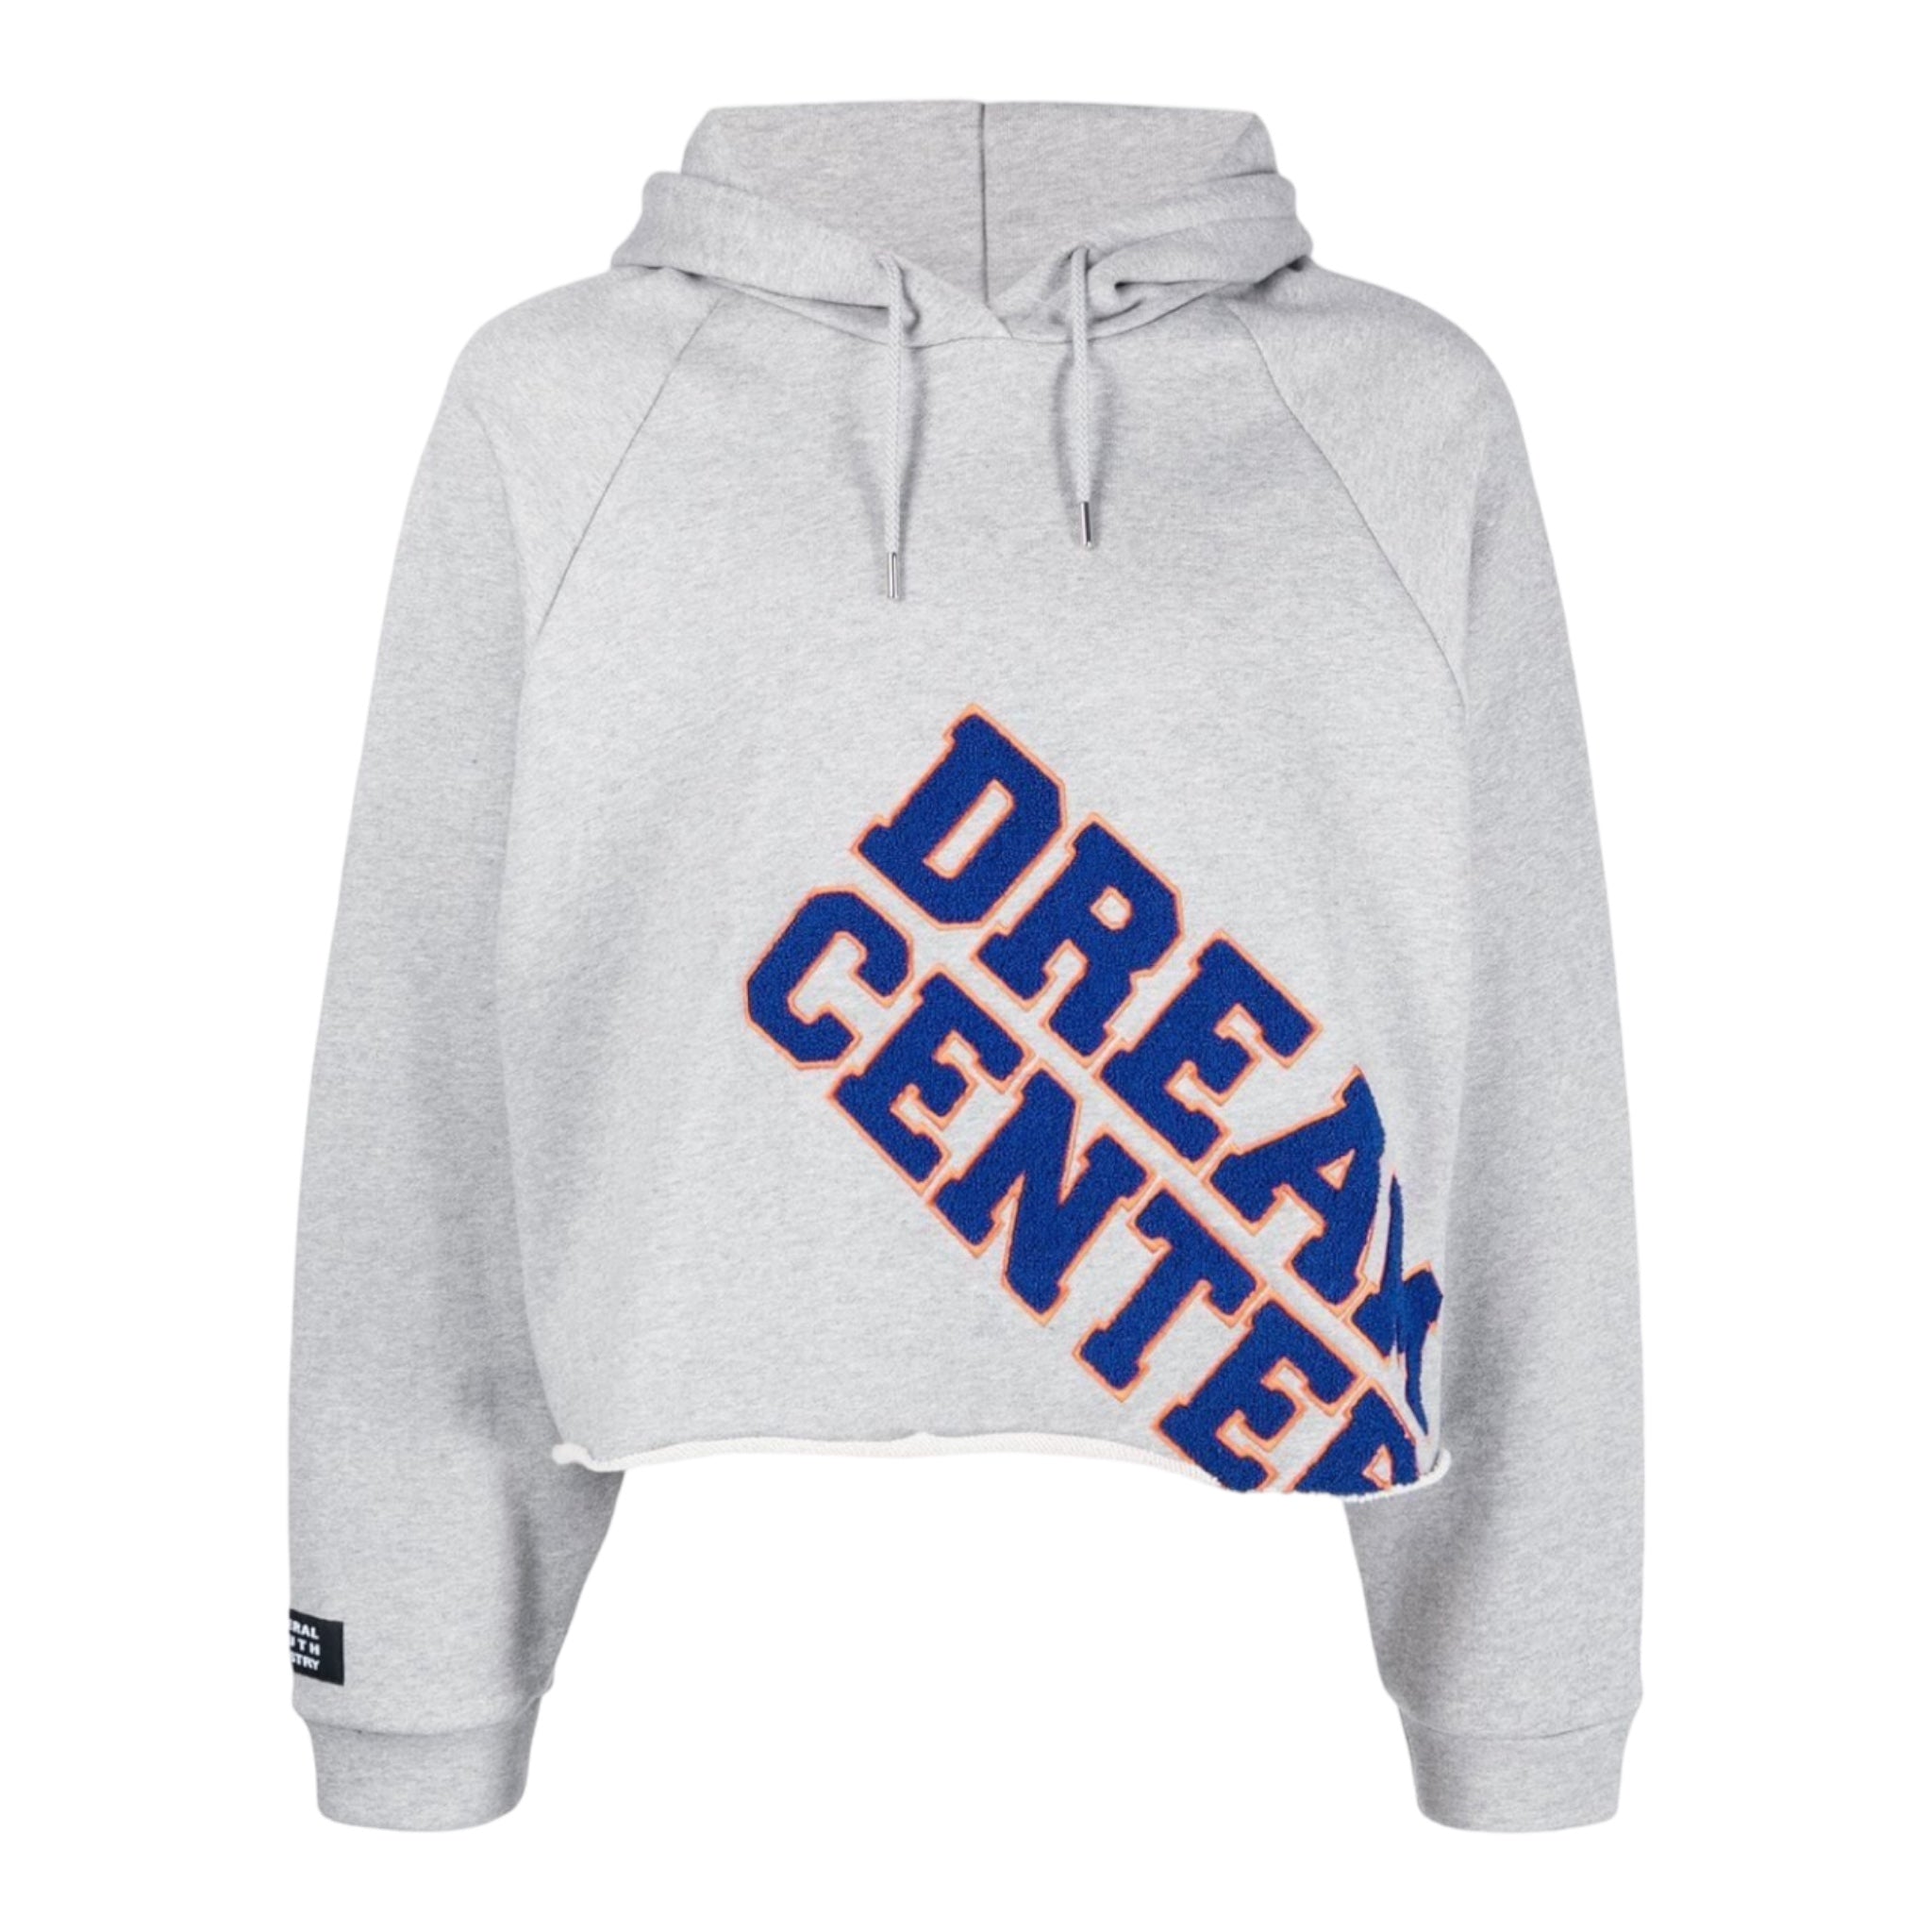 Unisex Hoodie Dream Center Grey - Liberal Youth Ministry